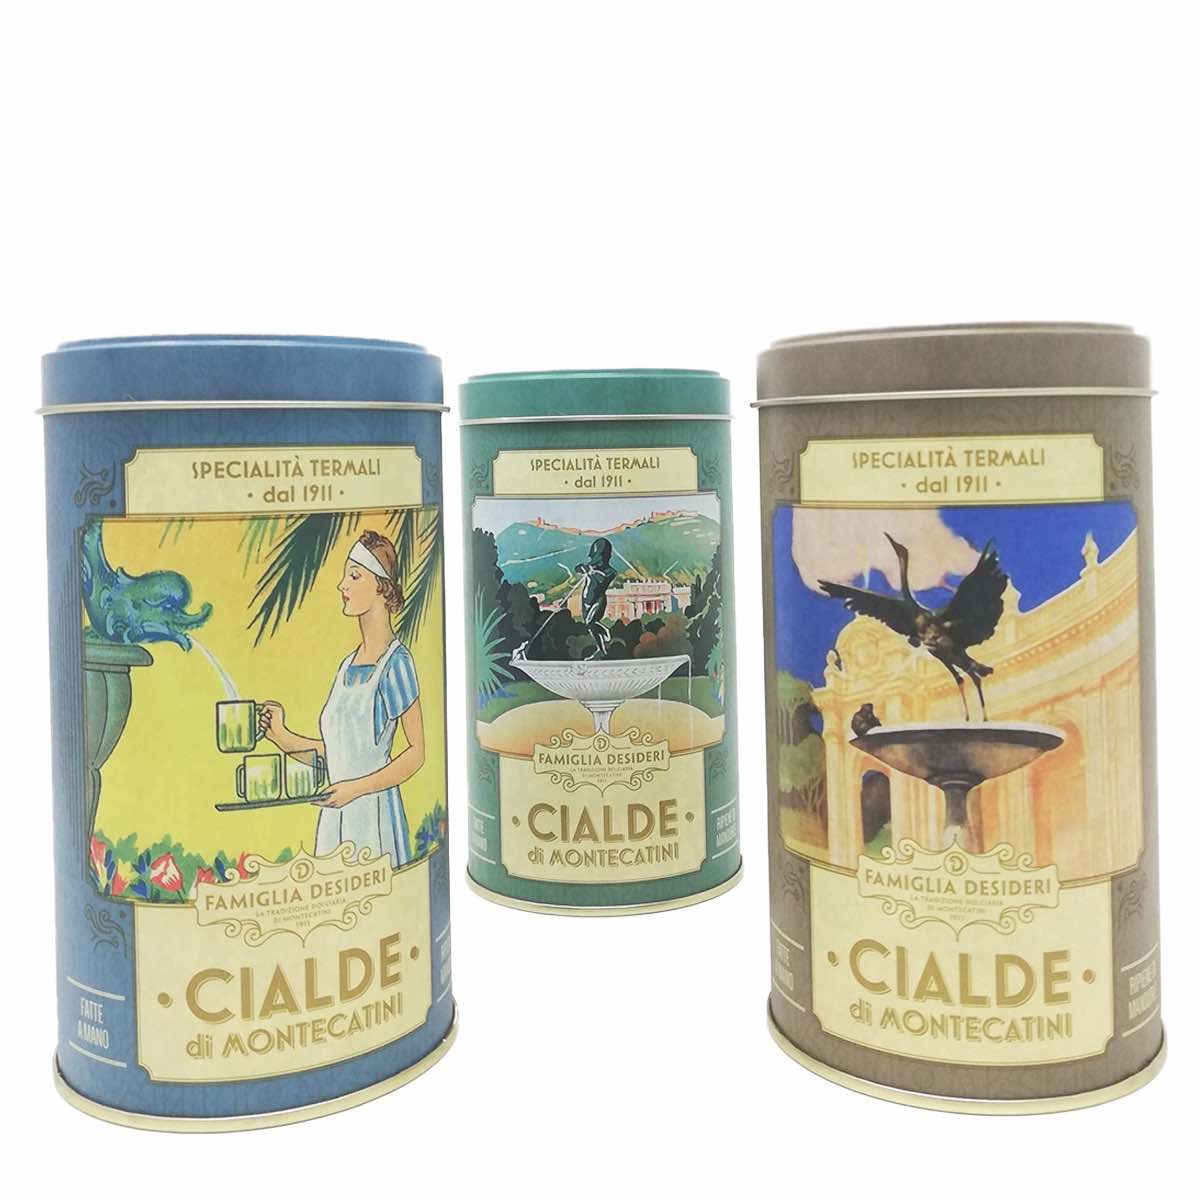 Cialde di Montecatini "The Traditional Natural Wafer with Almonds Since 1911"